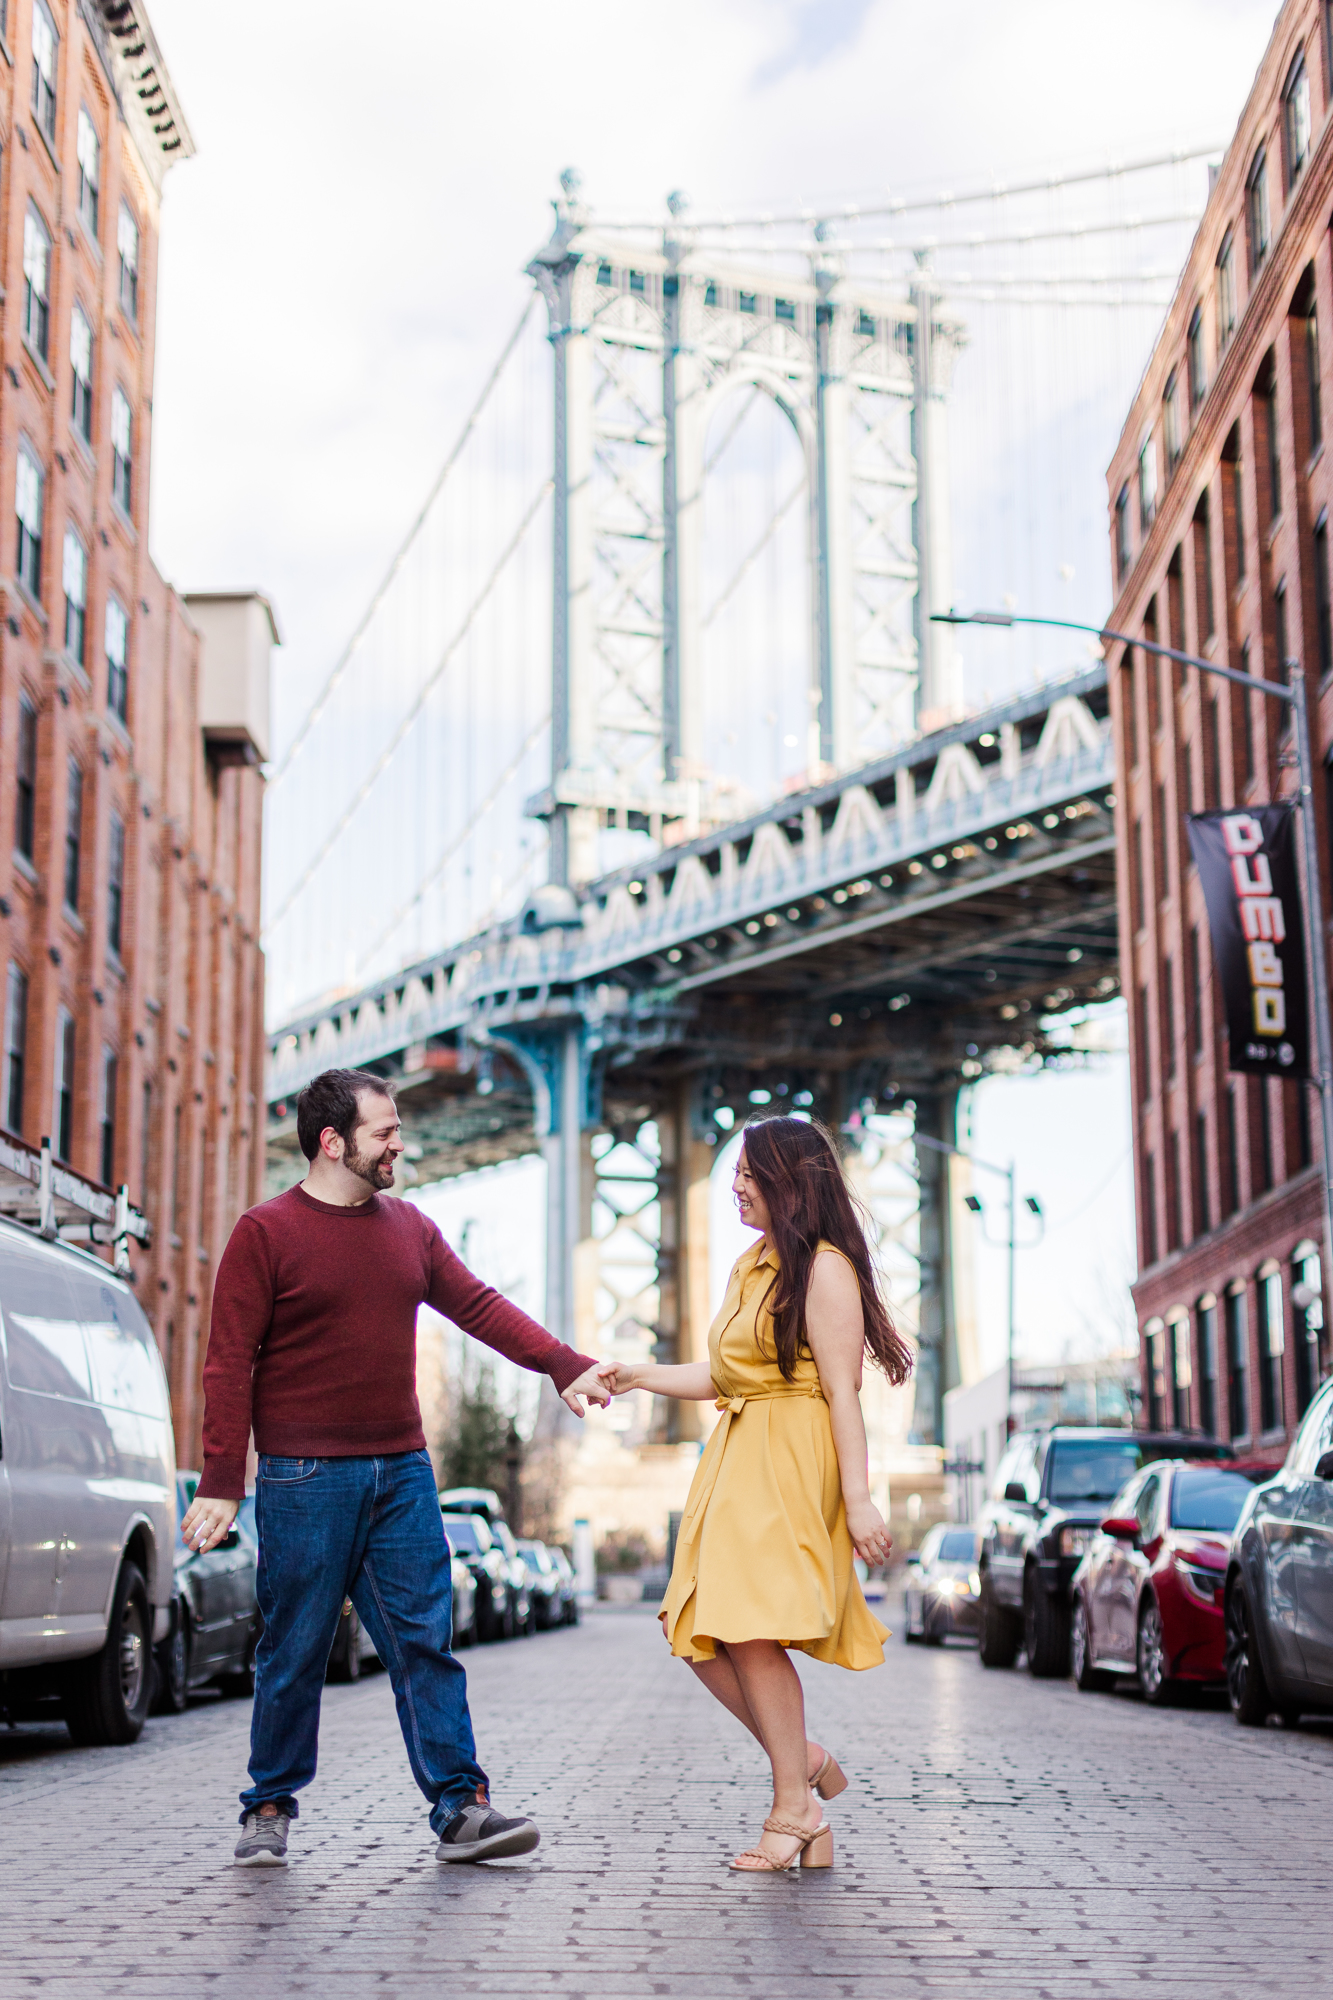 Dazzling Brooklyn Bridge Engagement Photography with Matching Outfits